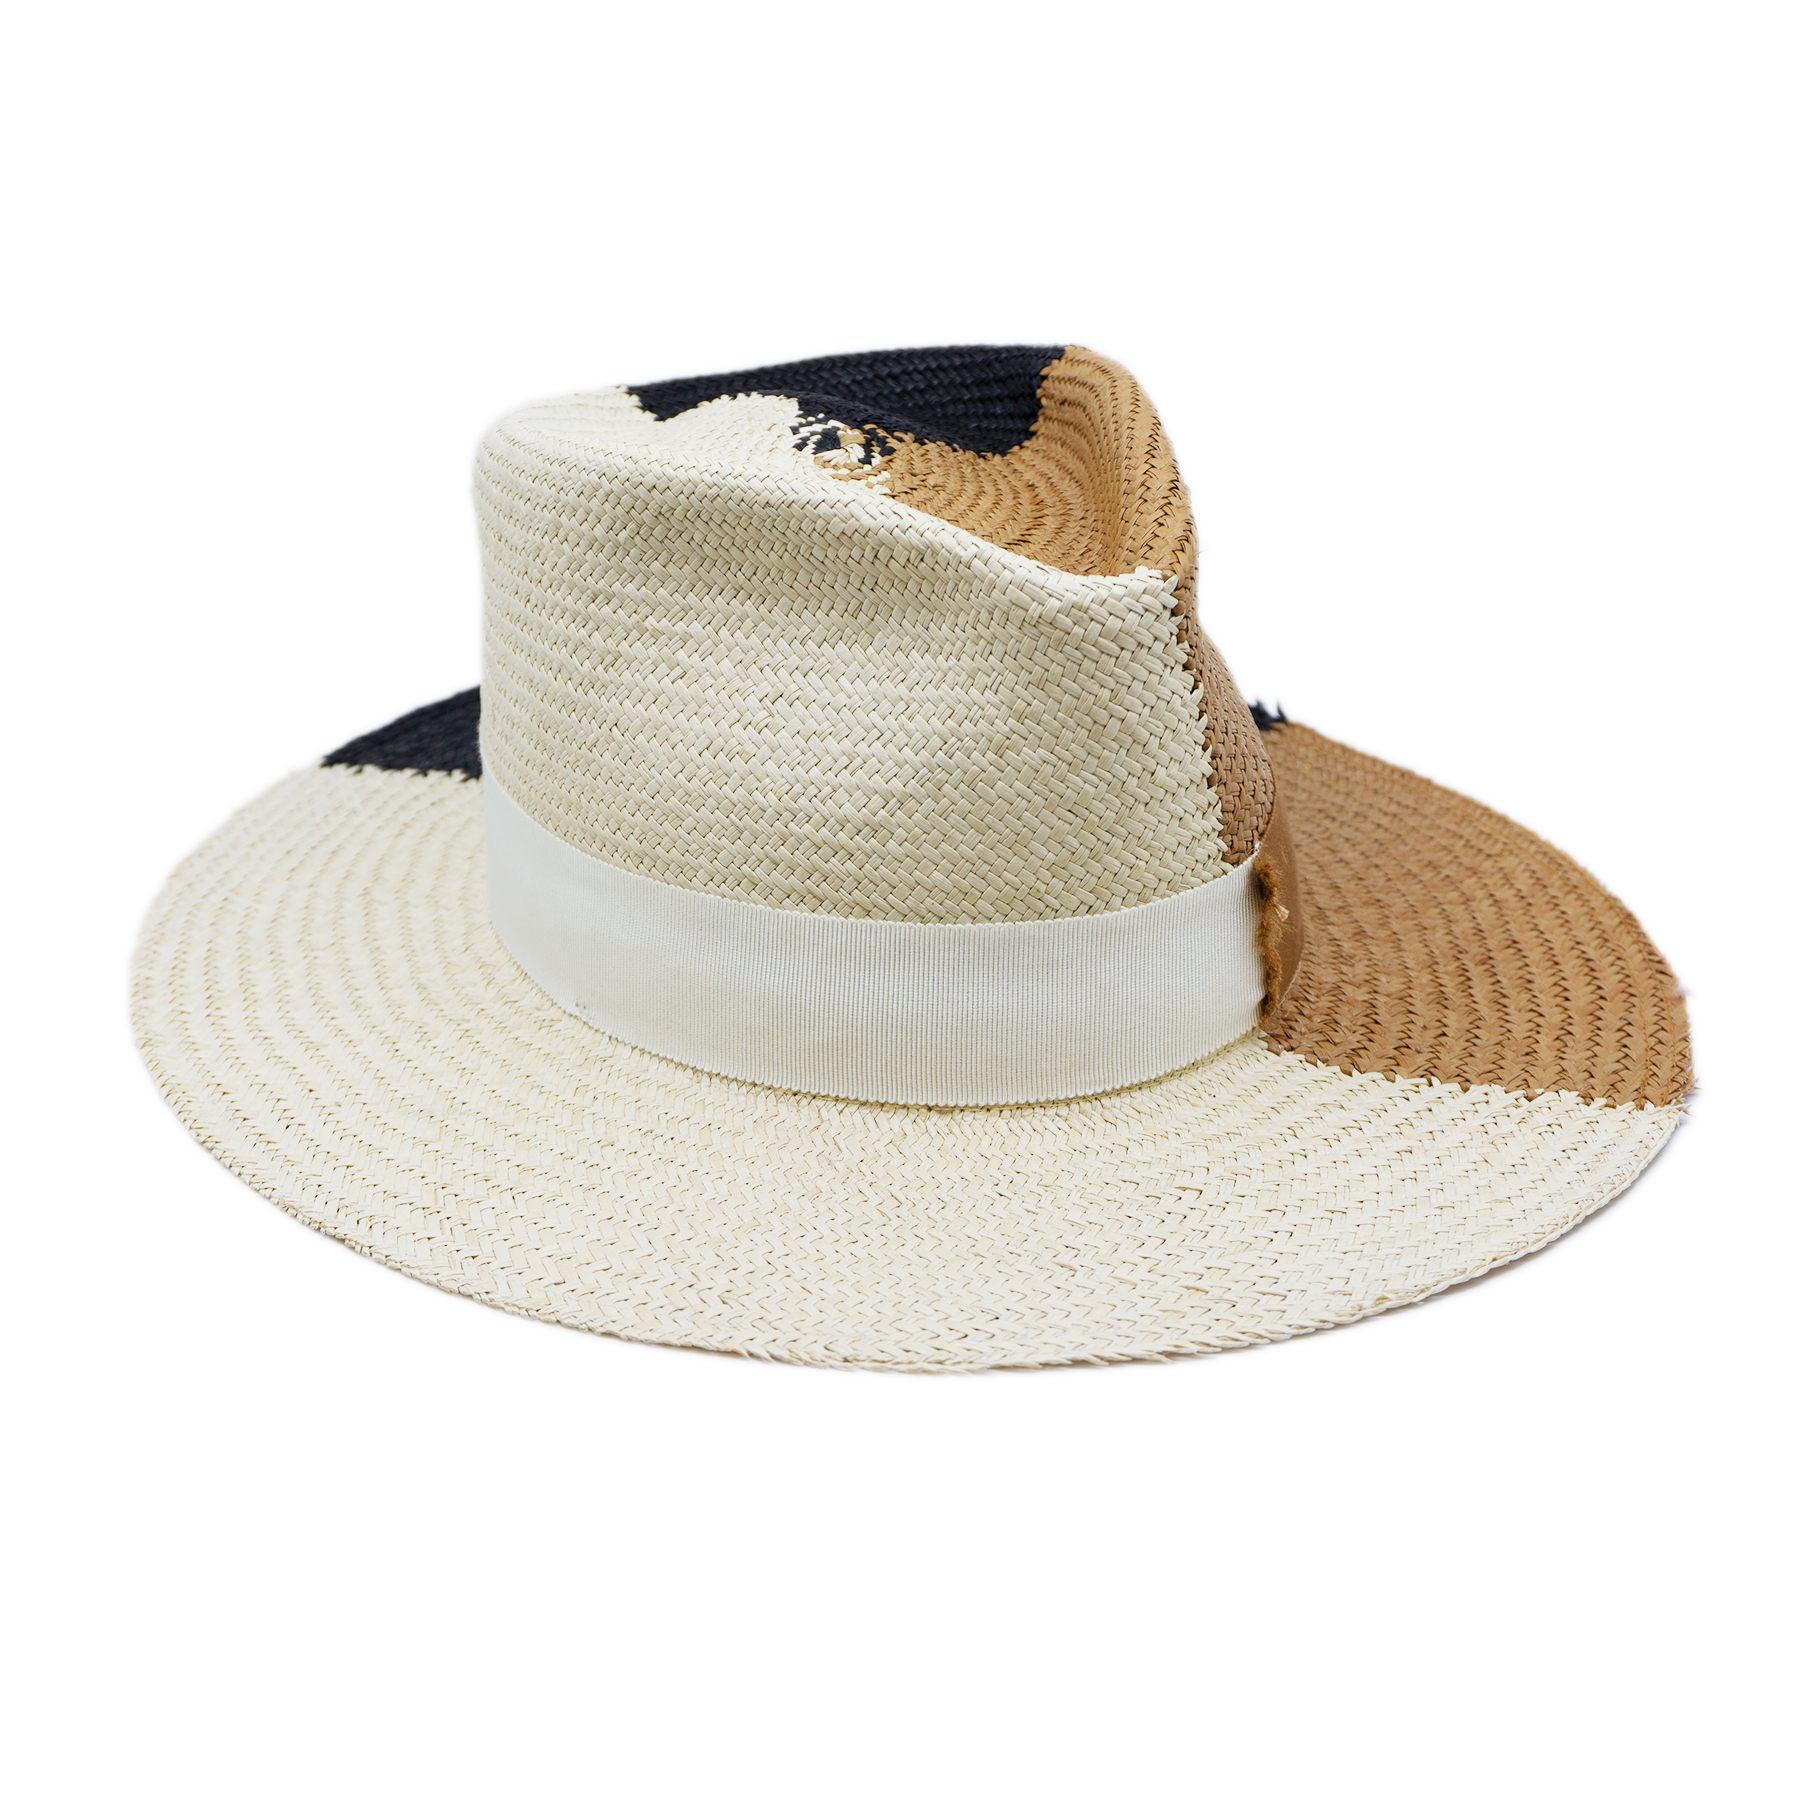 100% Ecuadorian straw in Tricolor; Natural,  Black,  and White   1 ½” Tonal grosgrain band and bow  with matching straw   Light grosgrain  fraying on band and brim    Woven in Ecuador  Lightly frayed brim  Made in USA